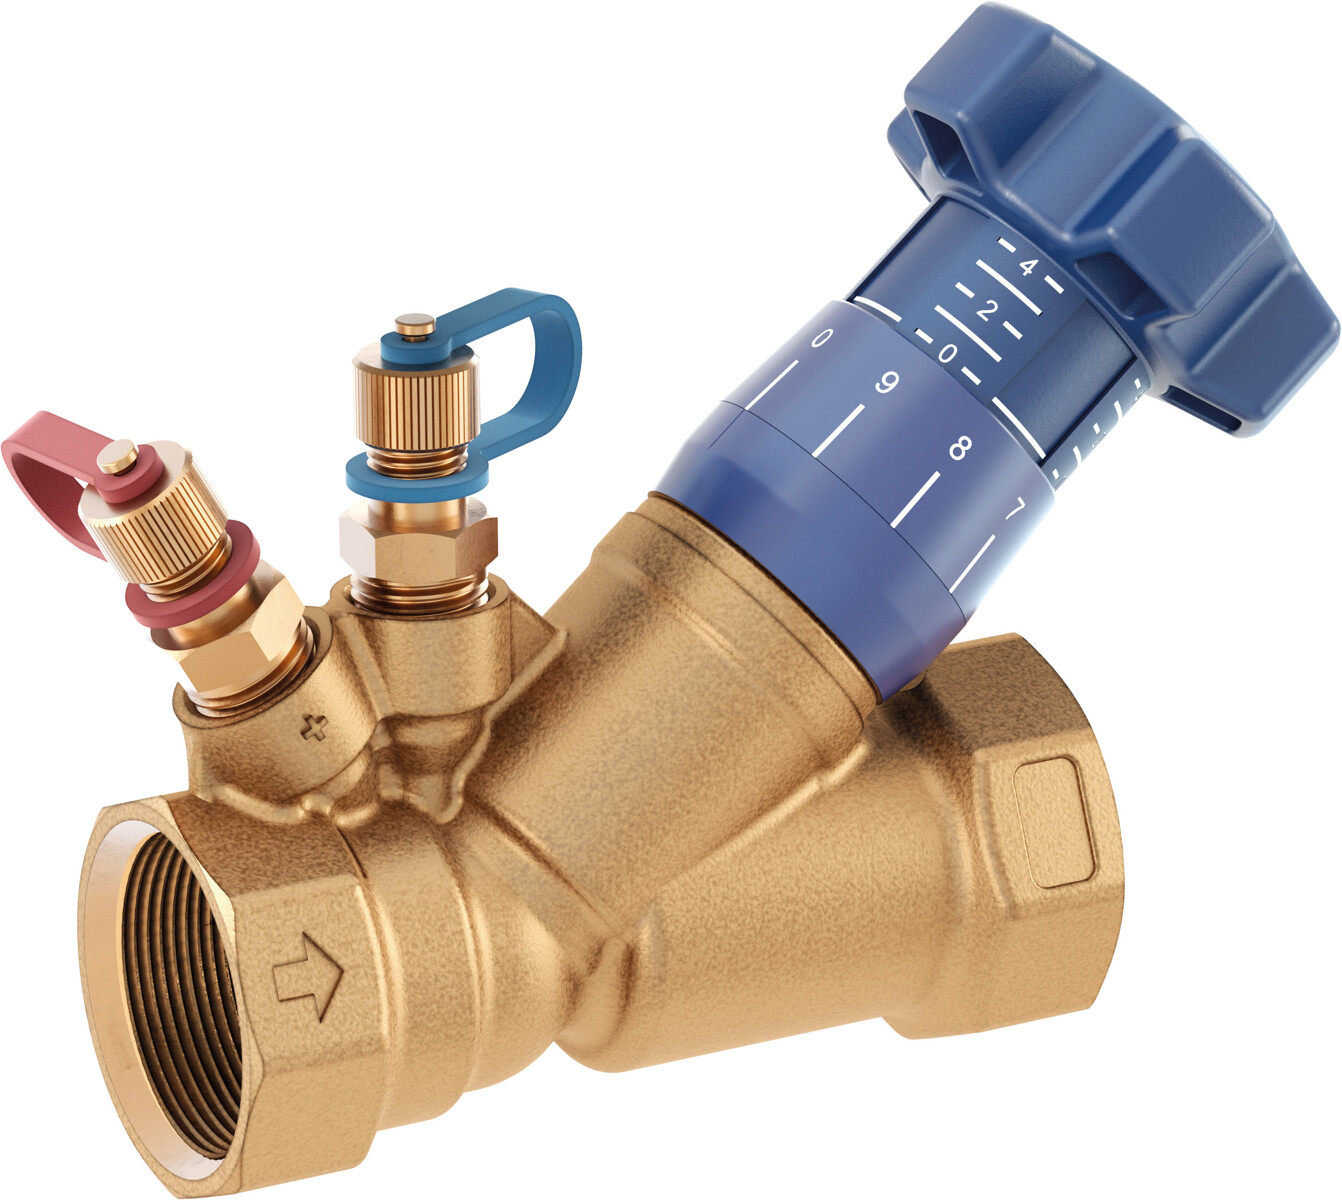 BOA-Control SBV balancing valve with female threaded ends